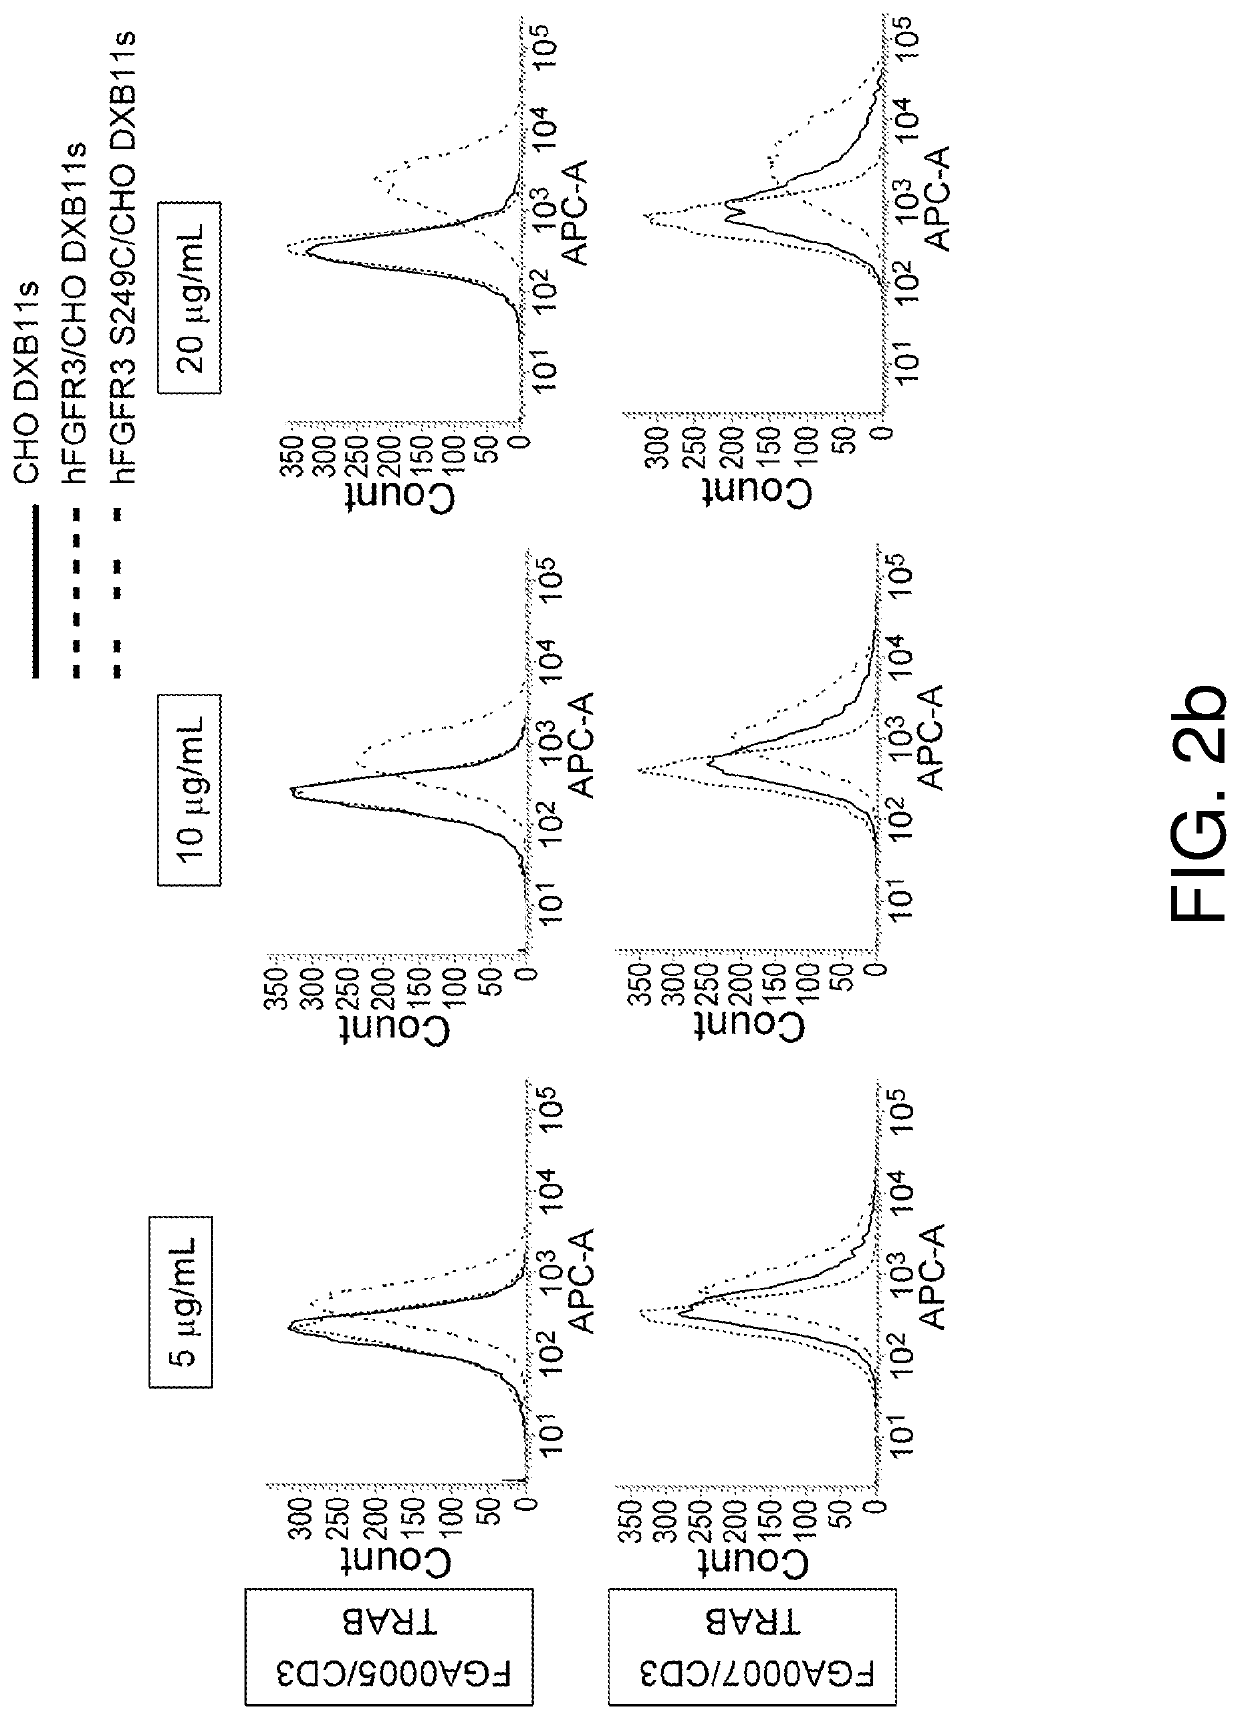 Anti-mutation type fgfr3 antibody and use therefor